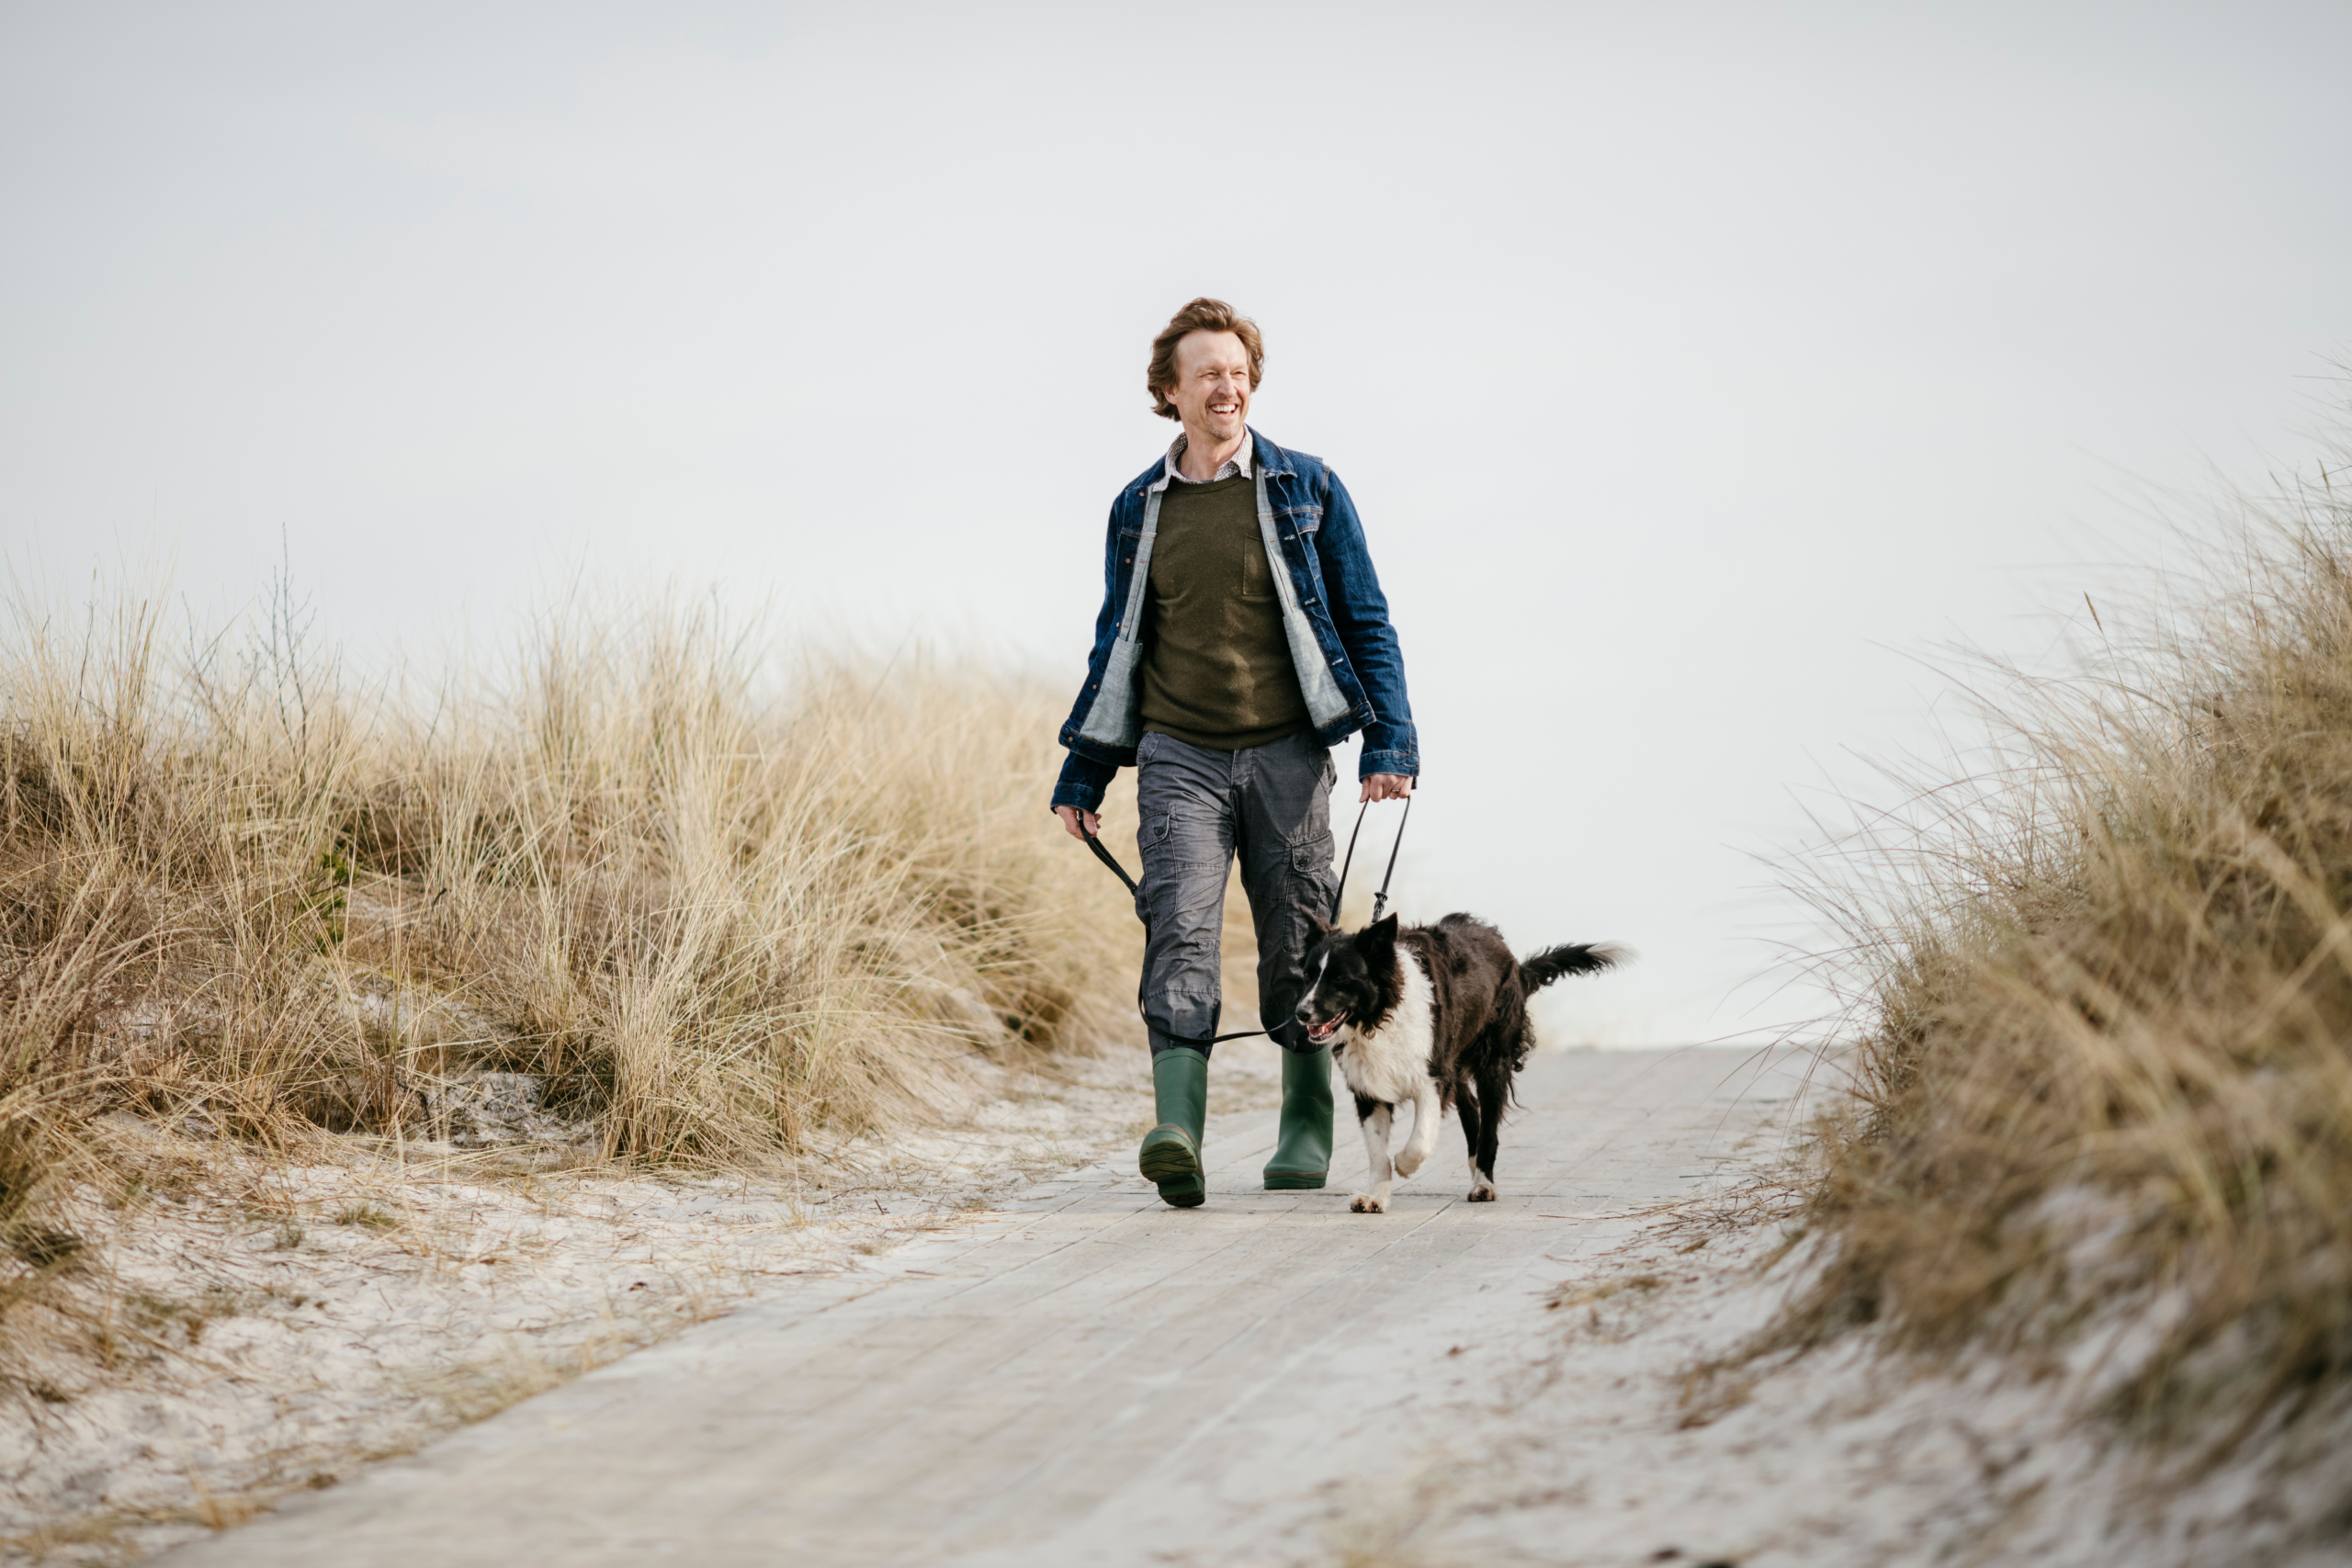 Practicing many elements of everyday self-care to maximize wellness, a man taking his border collie dog for a walk on the beach as a way to incorporate self-care